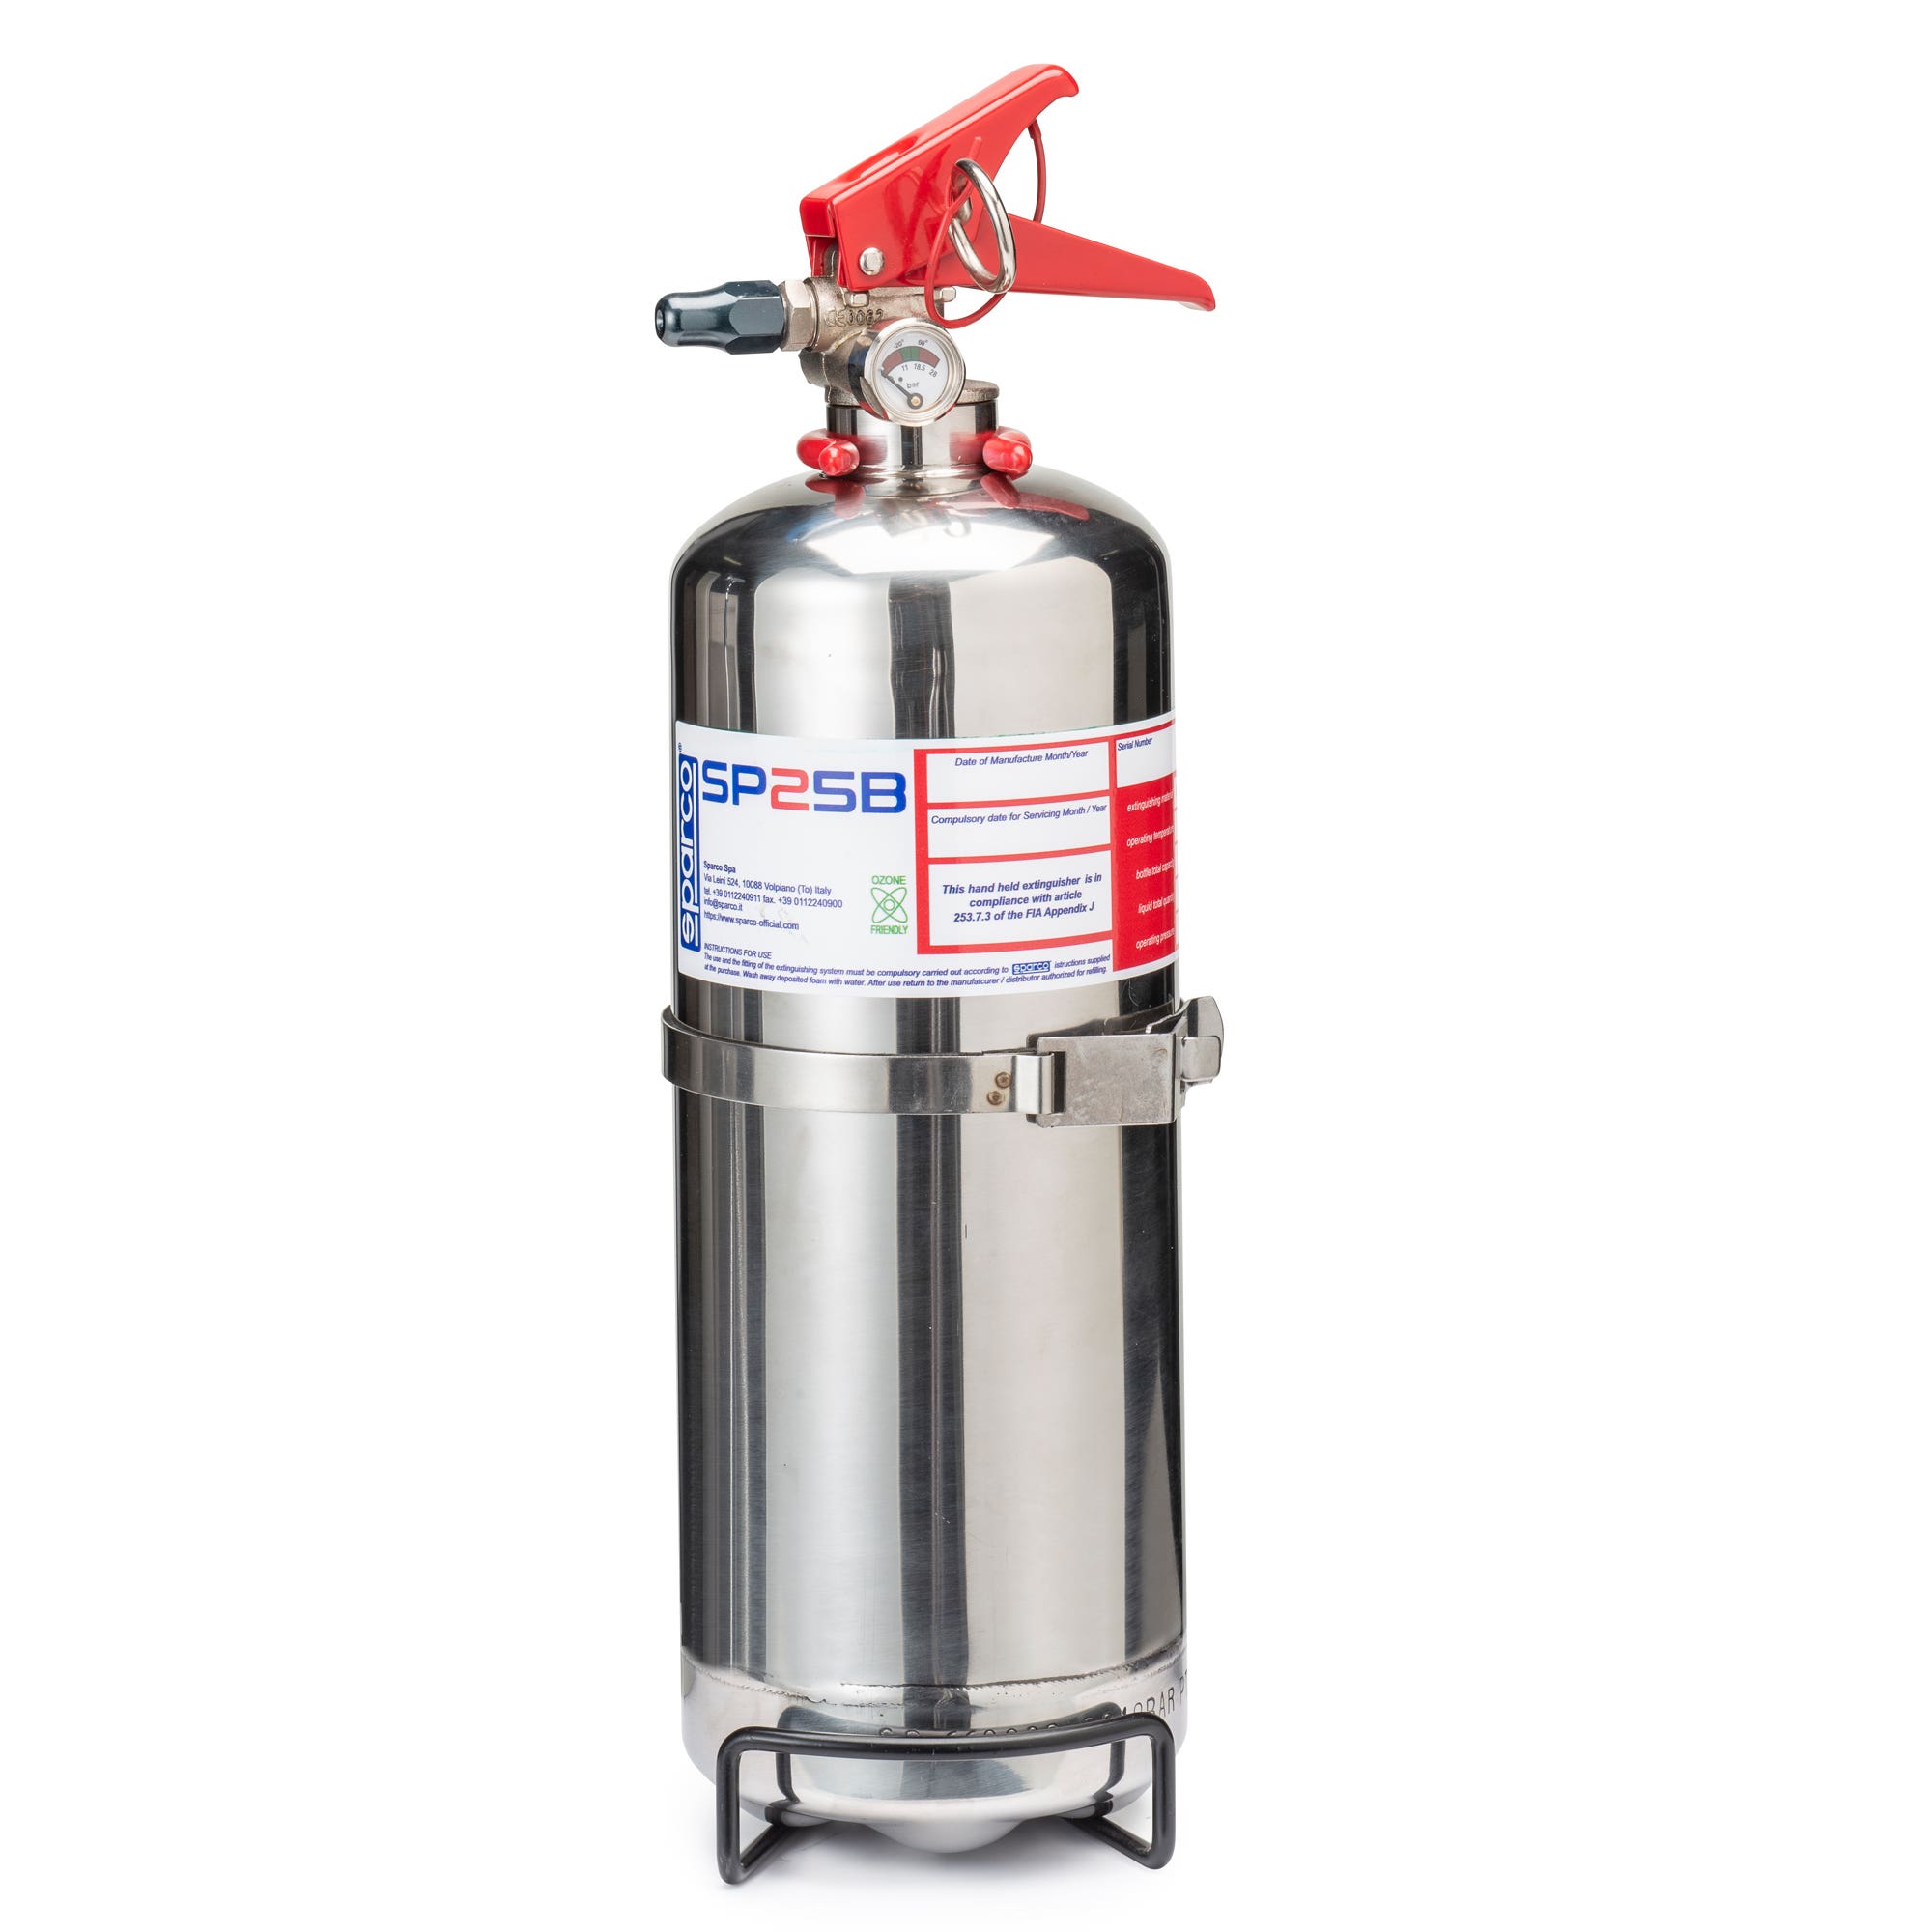 HAND-HELD FIRE EXTINGUISHER CE/EN3 2 STAINLESS STEEL NOVEC SP25B - Sparco Shop